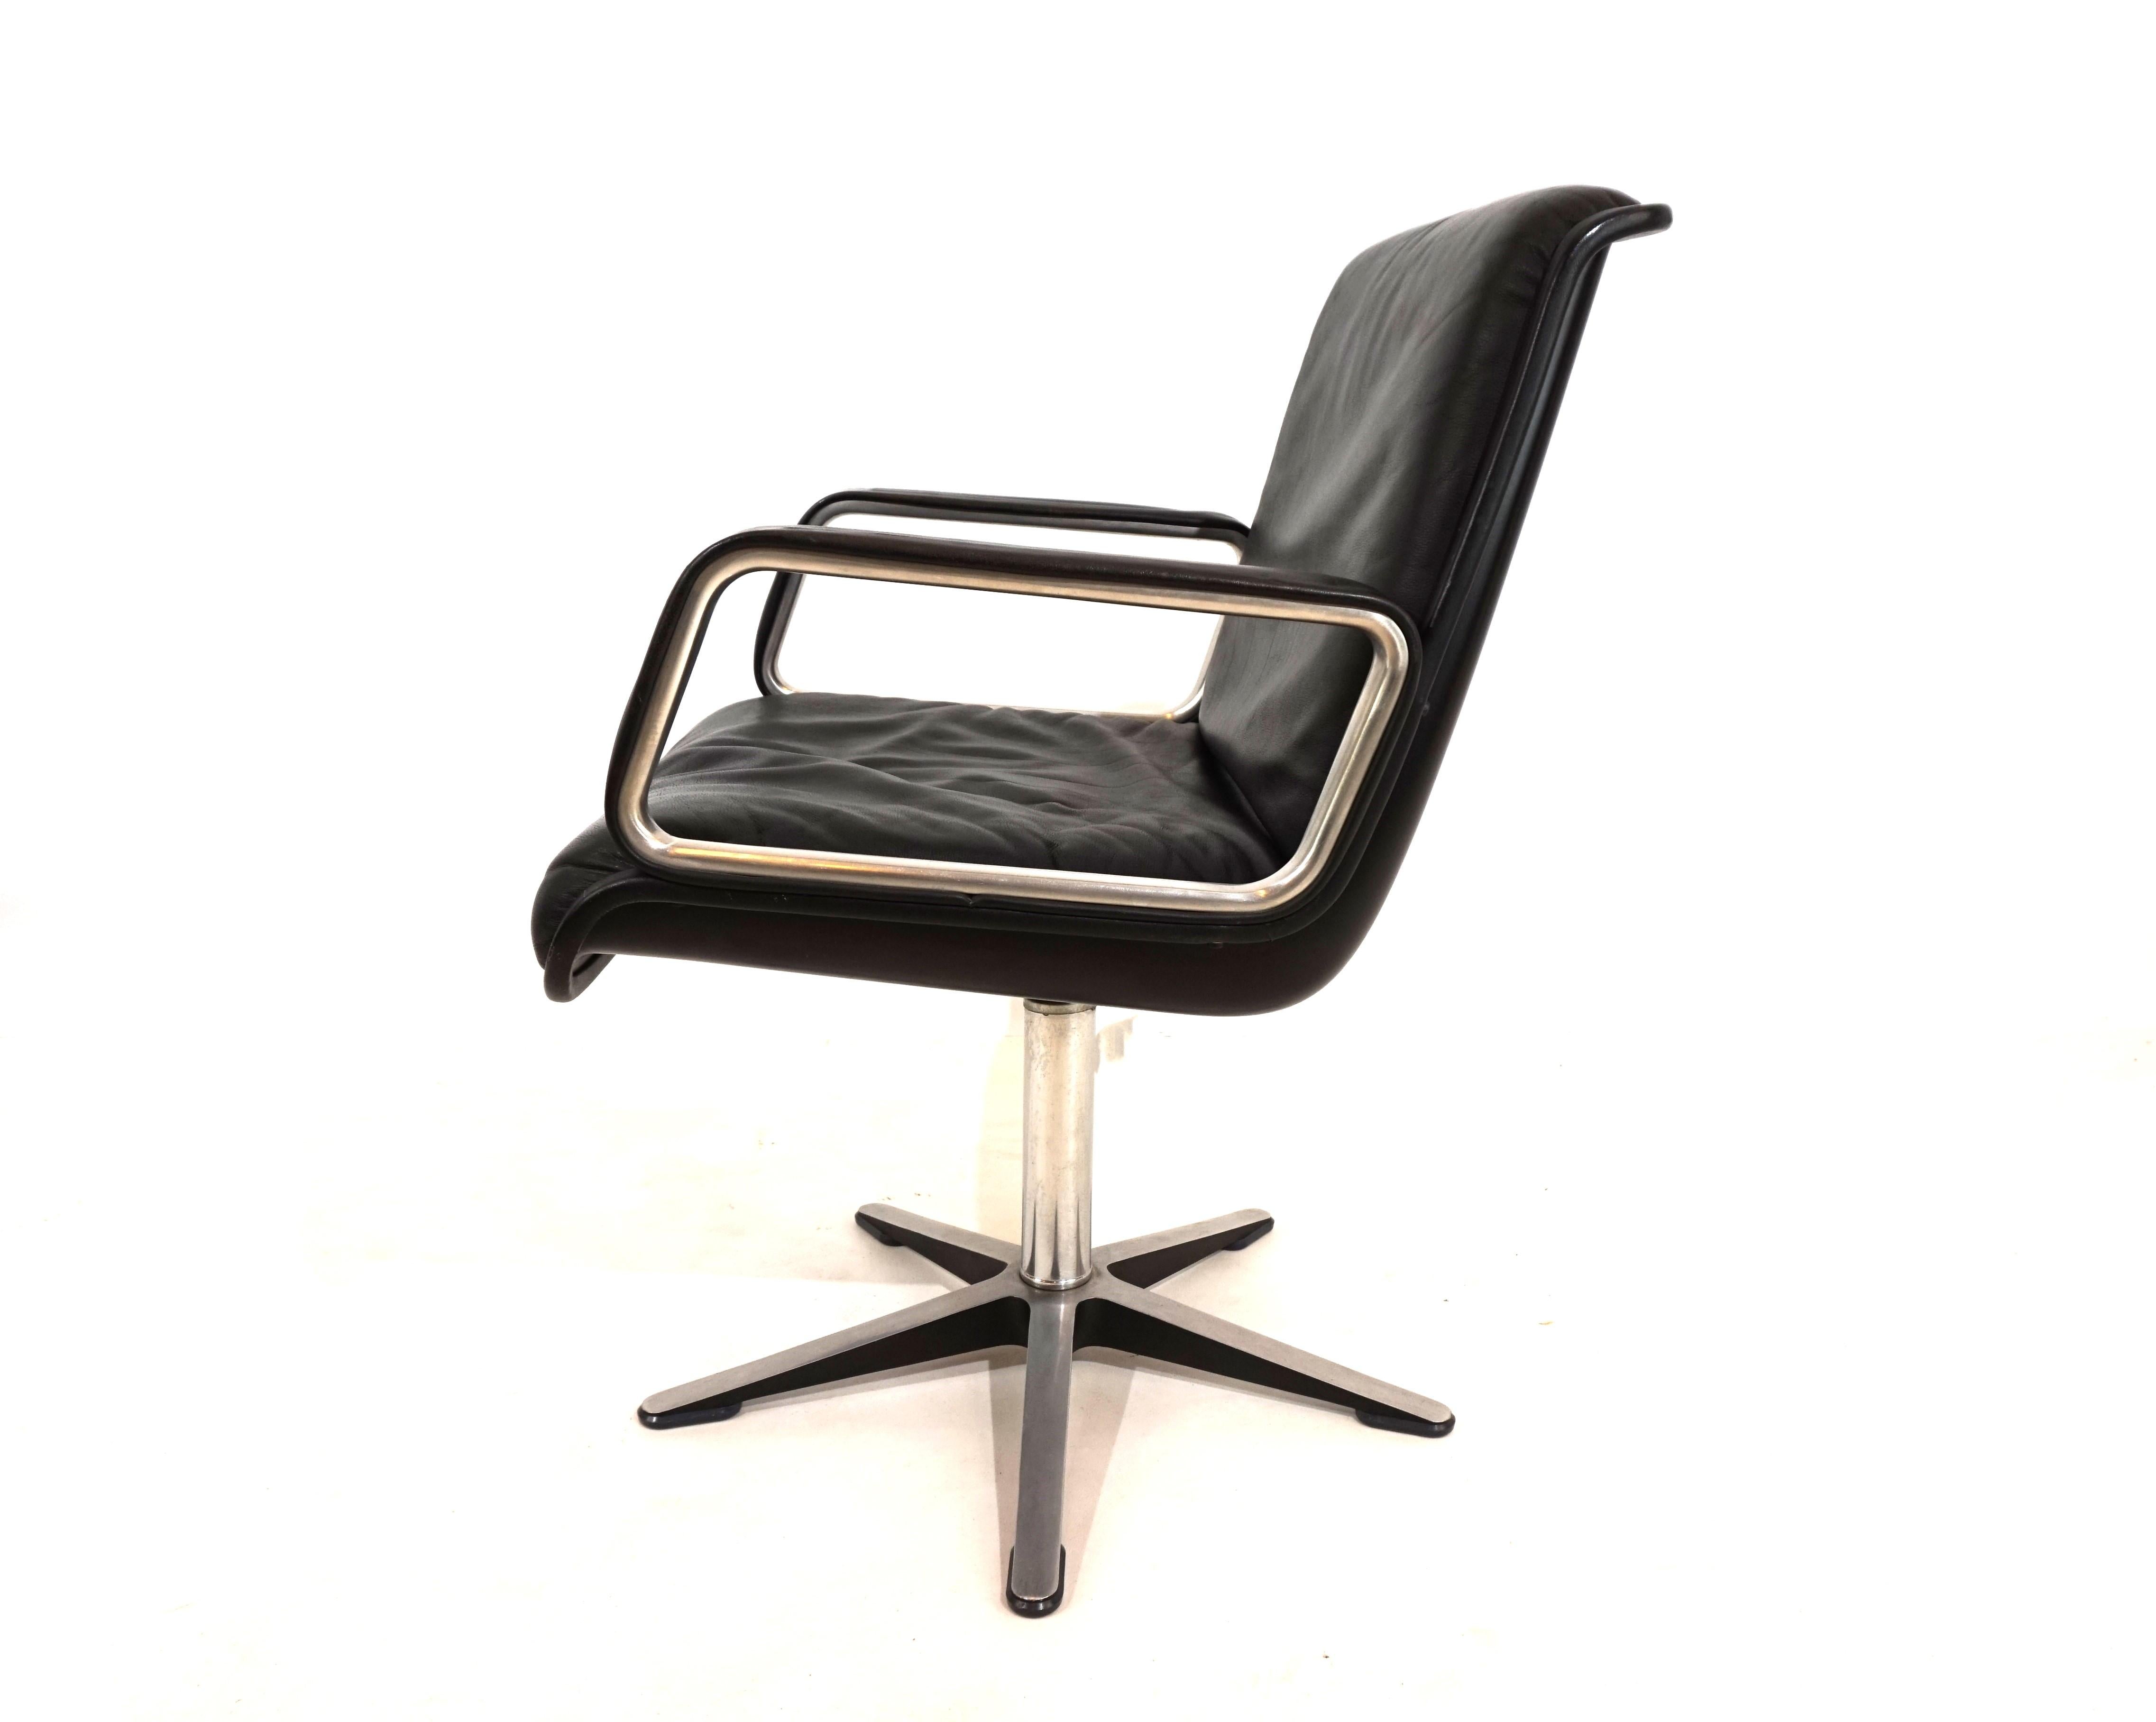 A later generation Wilkhahn Delta 2000 leather chair, with leather covered armrests, in a deep black leather tone, brushed aluminum and black shells, which is in excellent condition. The leather is flawless, the plastic shell and the aluminum base